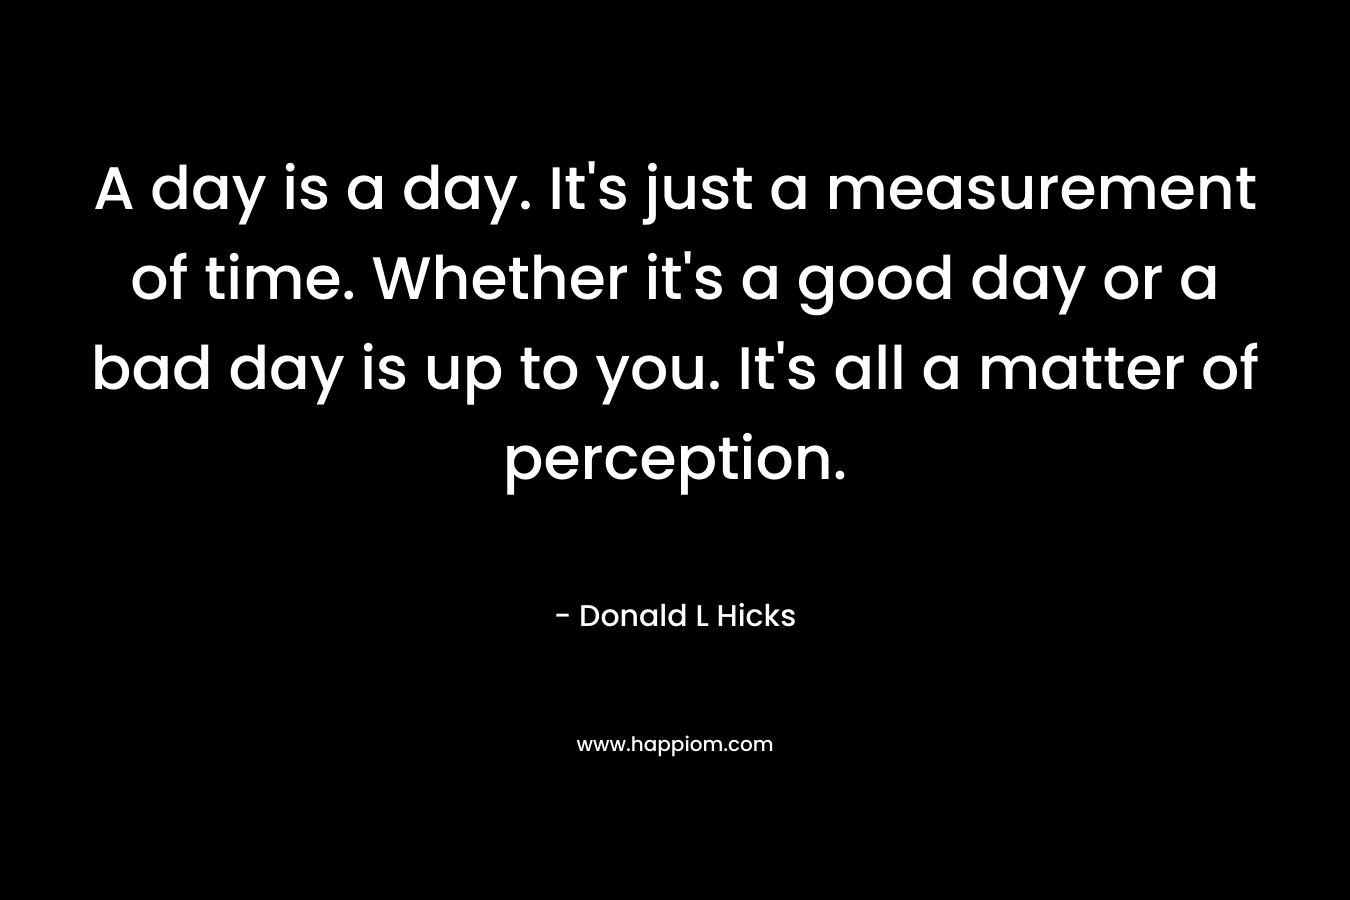 A day is a day. It’s just a measurement of time. Whether it’s a good day or a bad day is up to you. It’s all a matter of perception. – Donald L Hicks